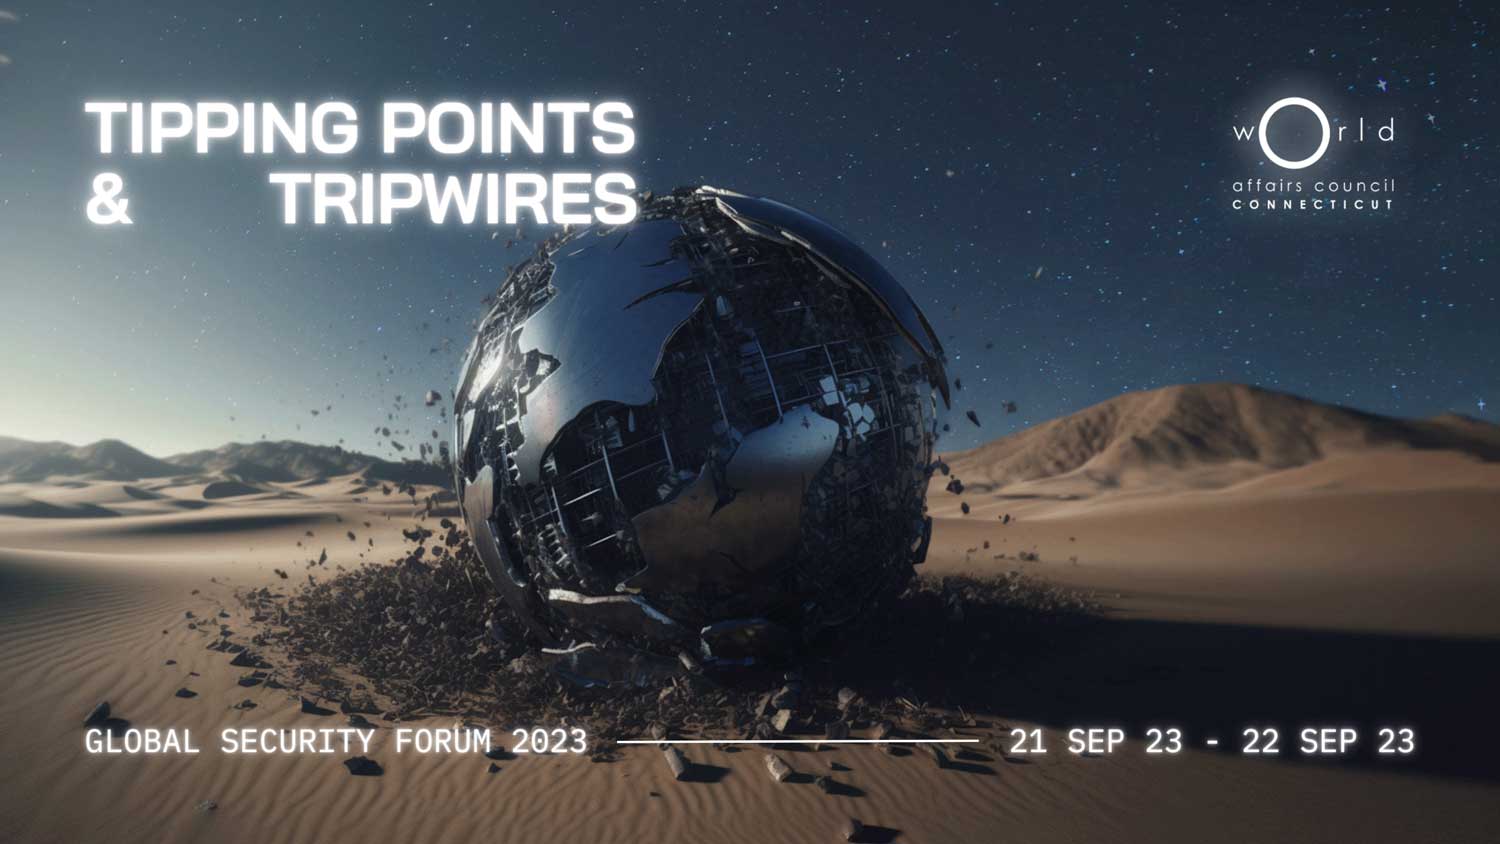 Virtual Global Security Forum: Tipping Points & Tripwires | Partner Program